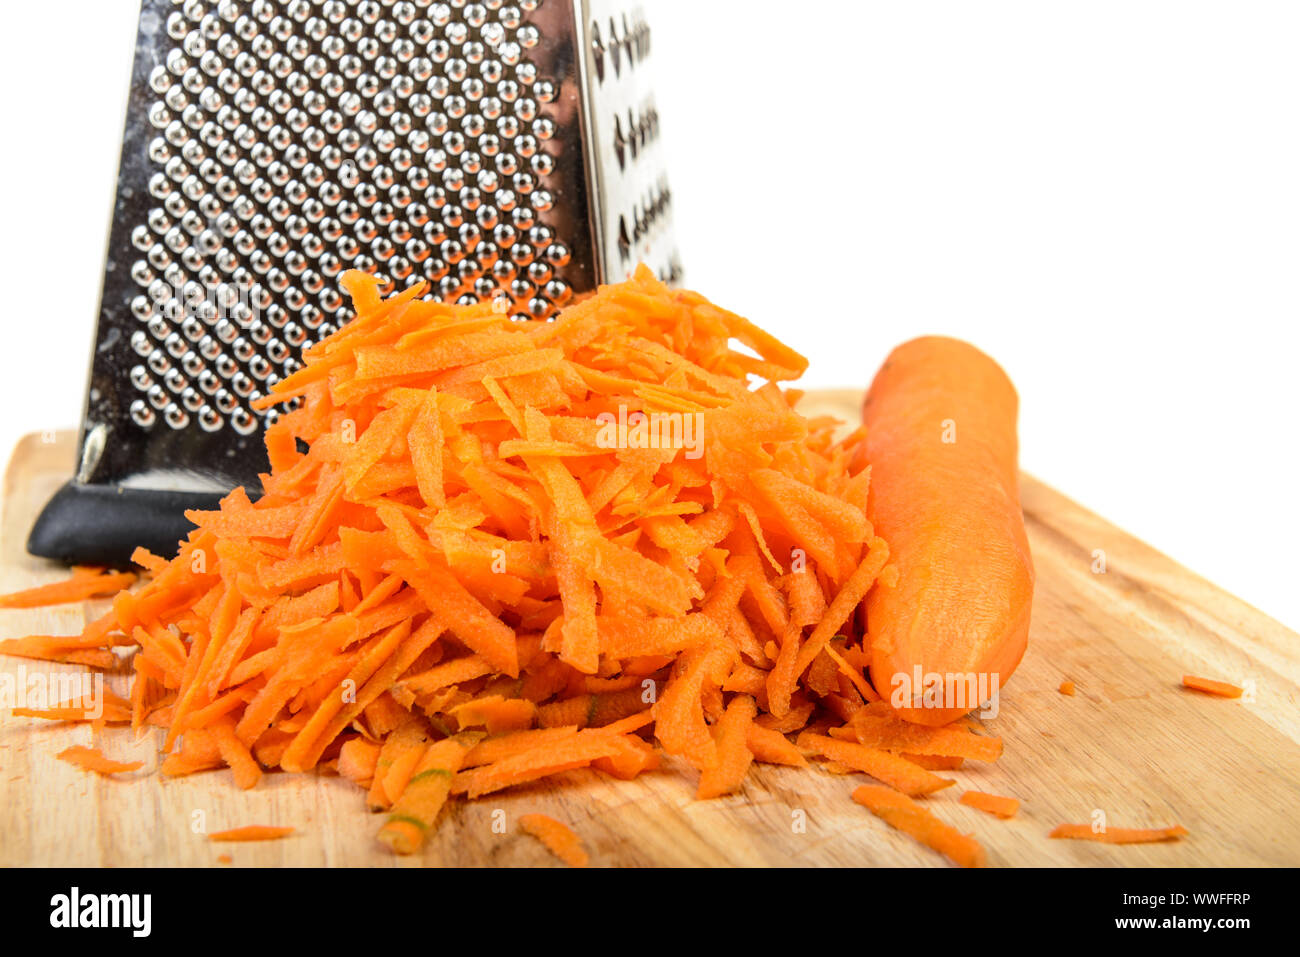 https://c8.alamy.com/comp/WWFFRP/carrots-grated-and-whole-small-grater-on-wooden-board-isolated-over-white-WWFFRP.jpg